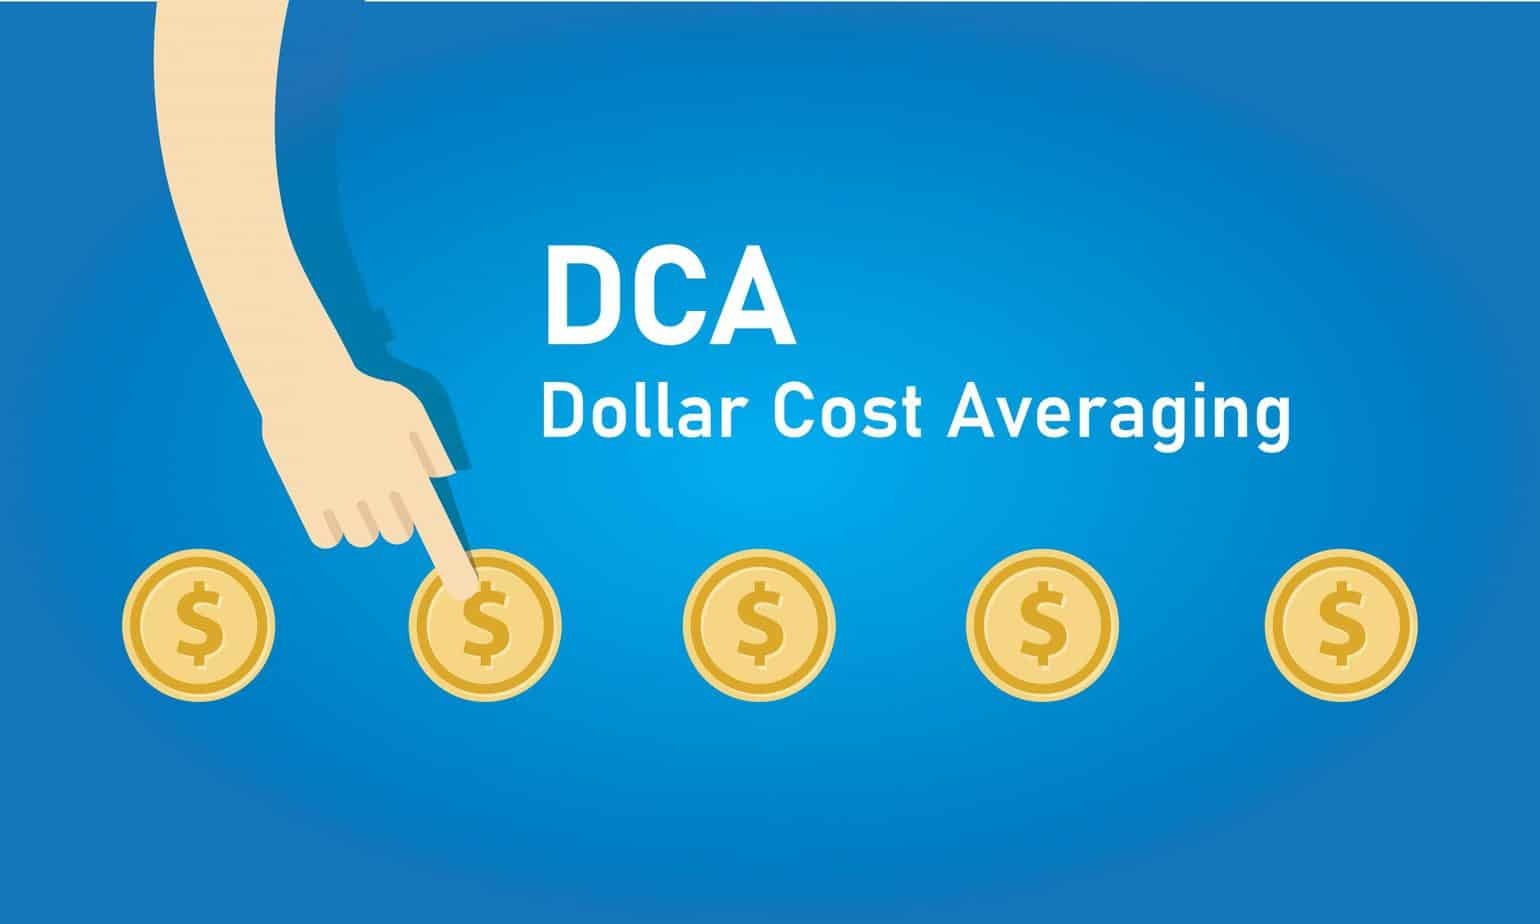 What is Dollar Cost Averaging